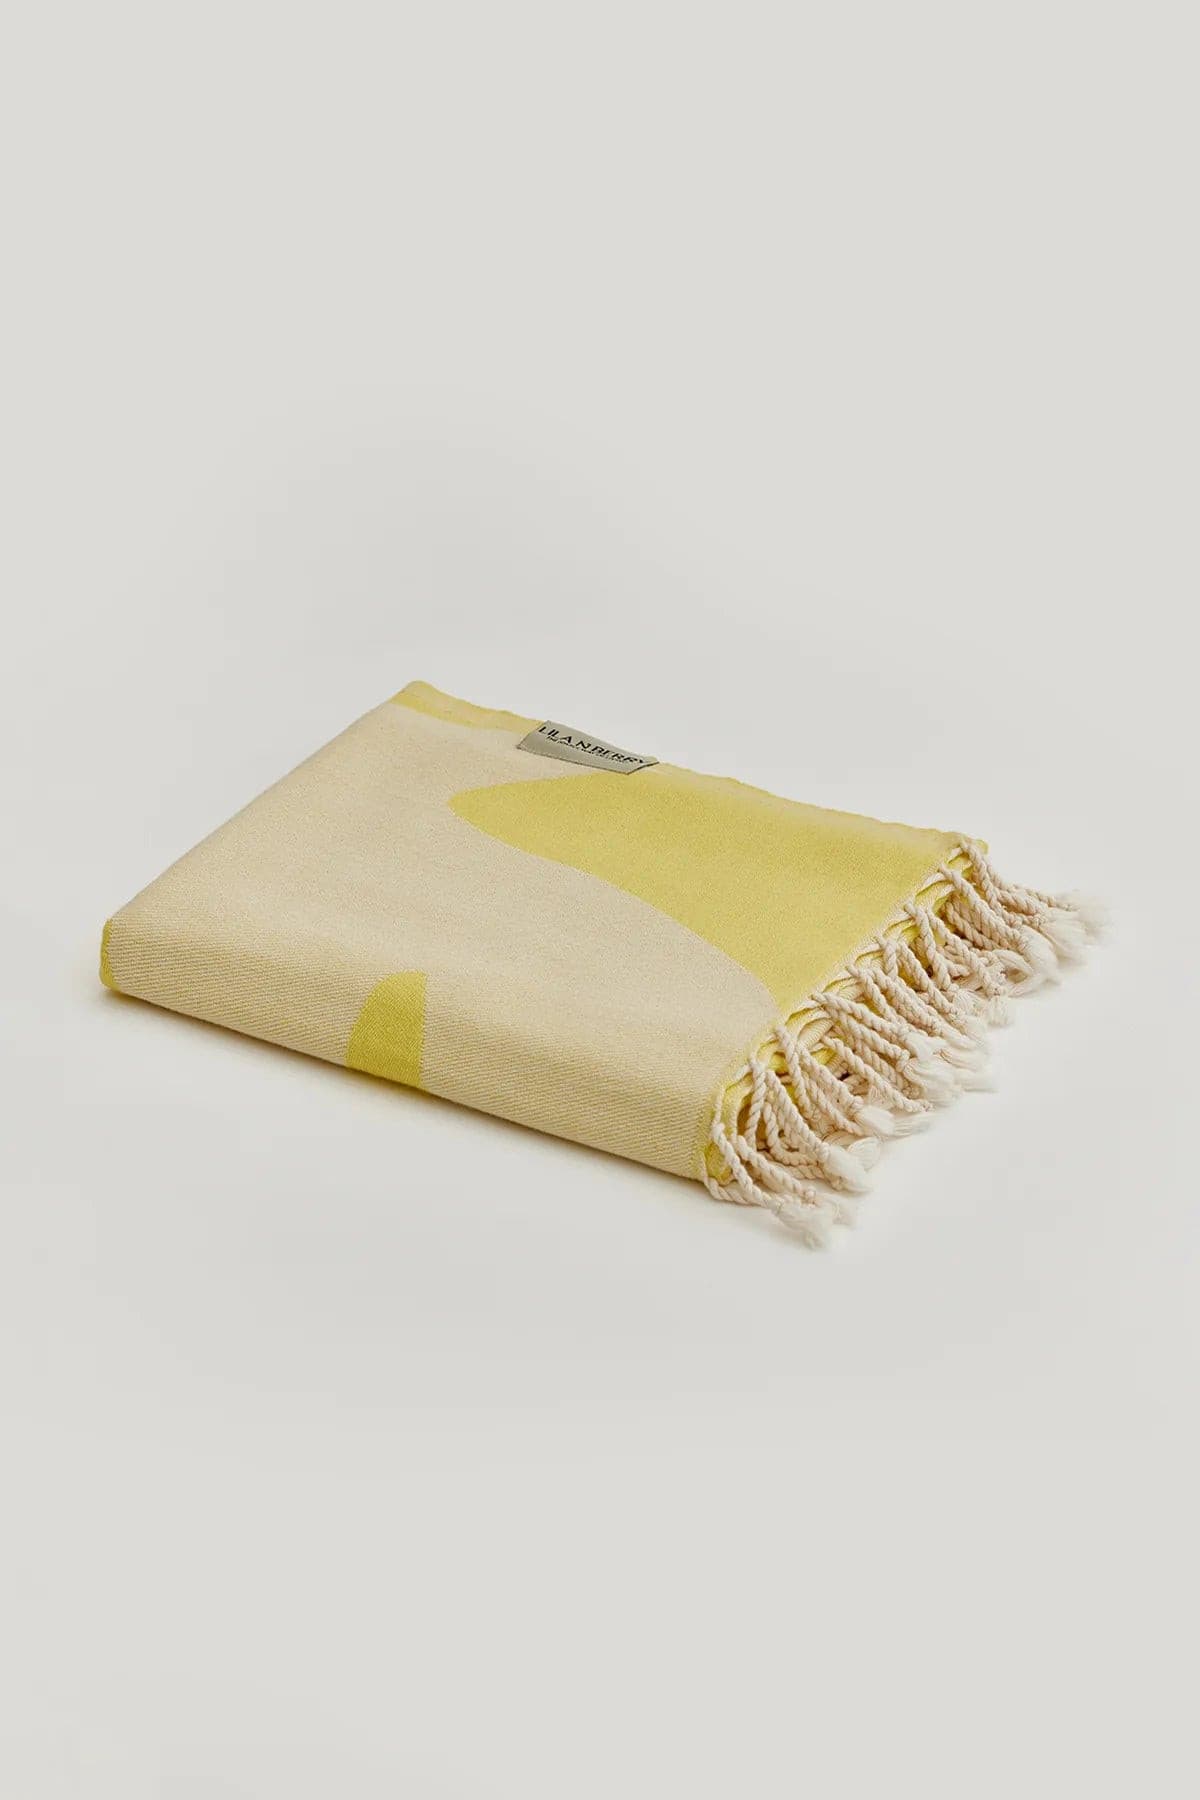 Beach/Bath,living place,Mellow Yellow,Turkish towel, folded,summer,line patterned,double-faces,purified sand,light,compact, easy pack,fun, recycled,double color,dimond,eastern flare,breeze,tropical forest